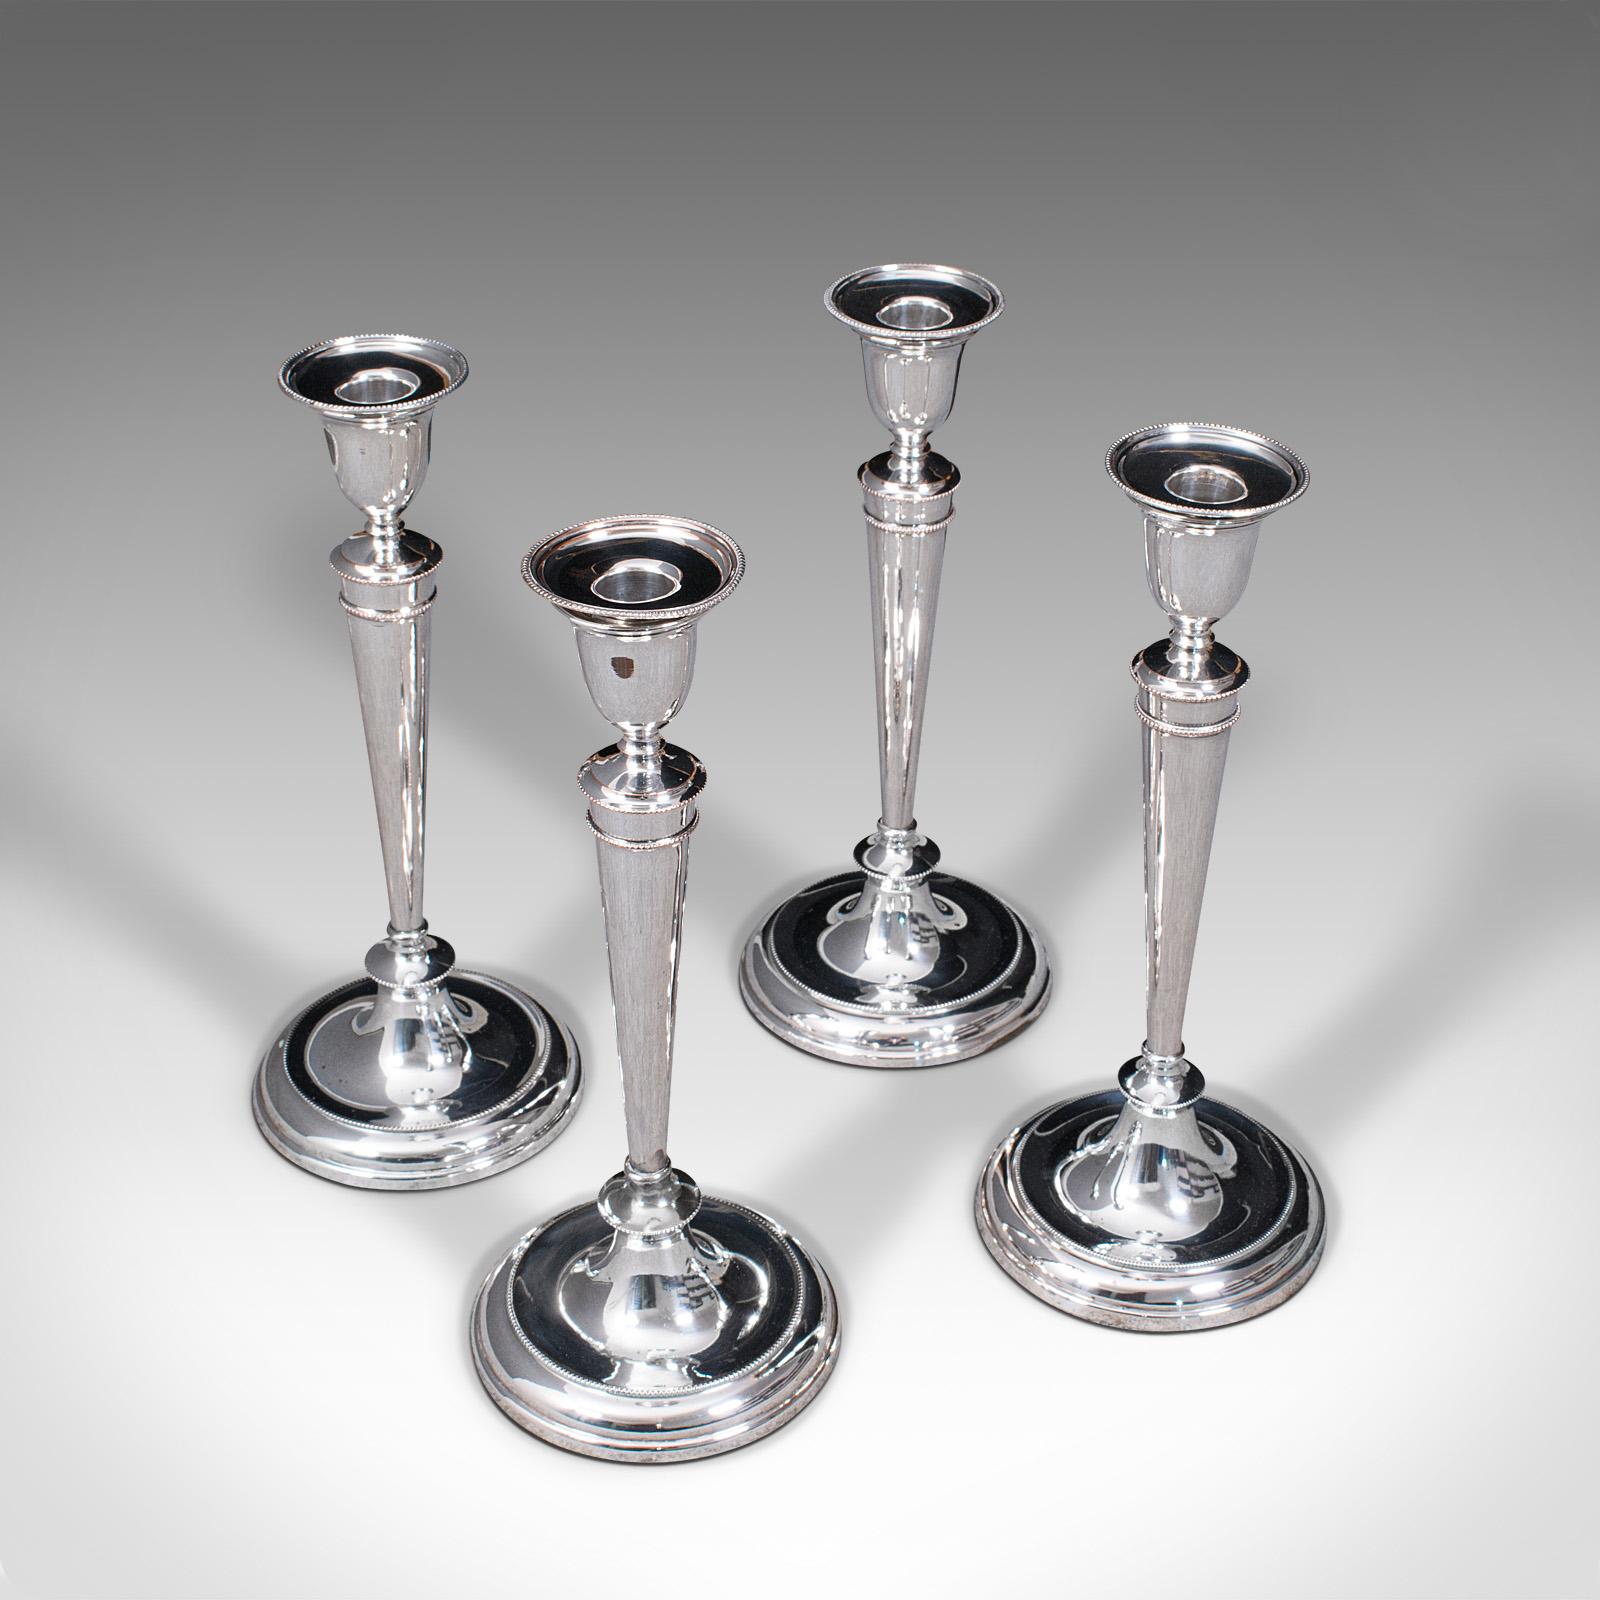 Set of 4 Antique Candlesticks, English, Silver Plate, Candle Sconce, Victorian For Sale 2